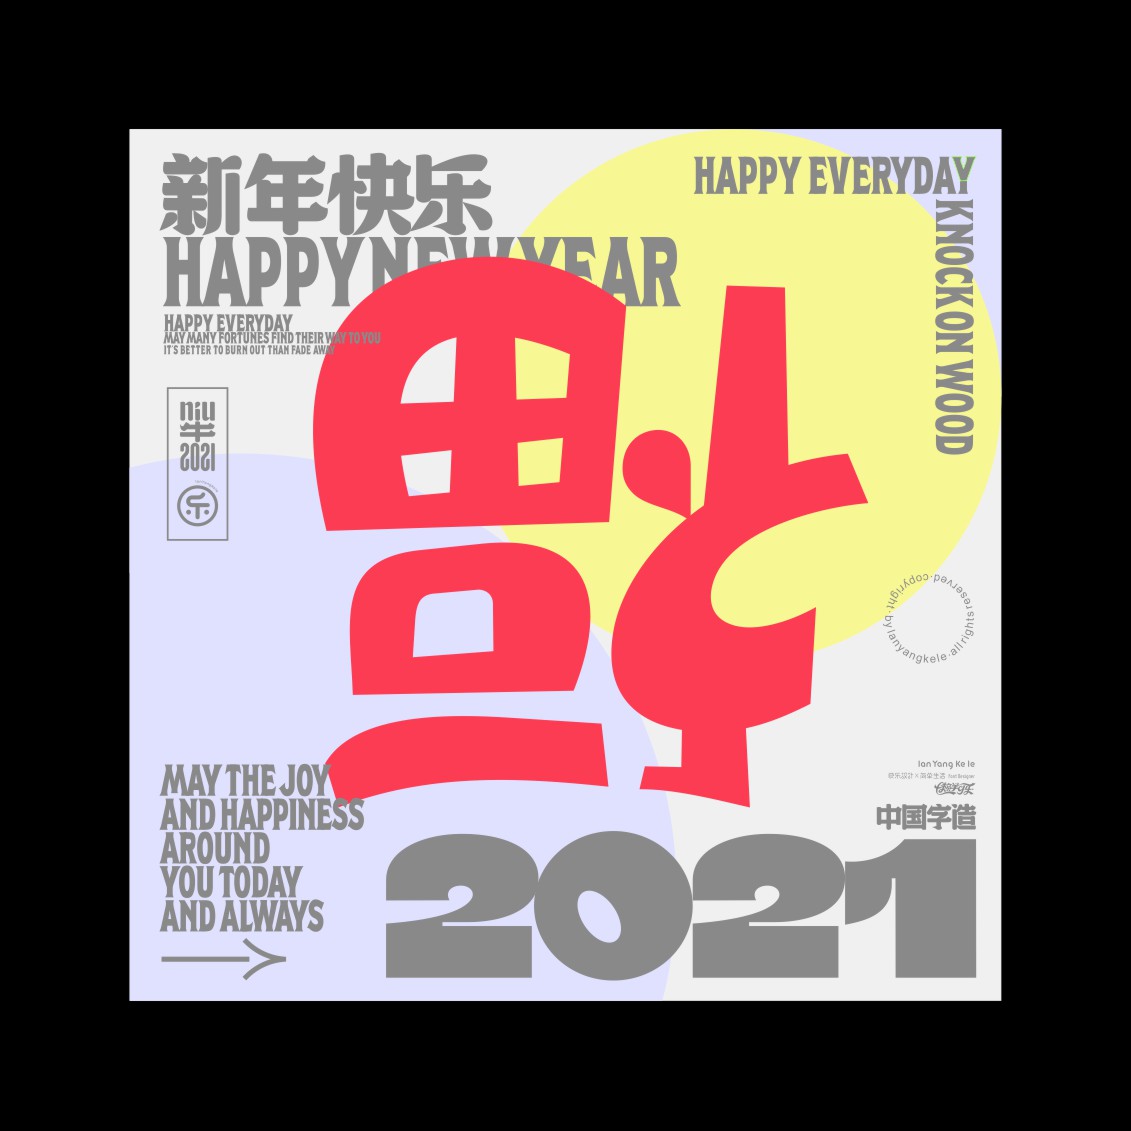 A group of New Year's greetings In 2021